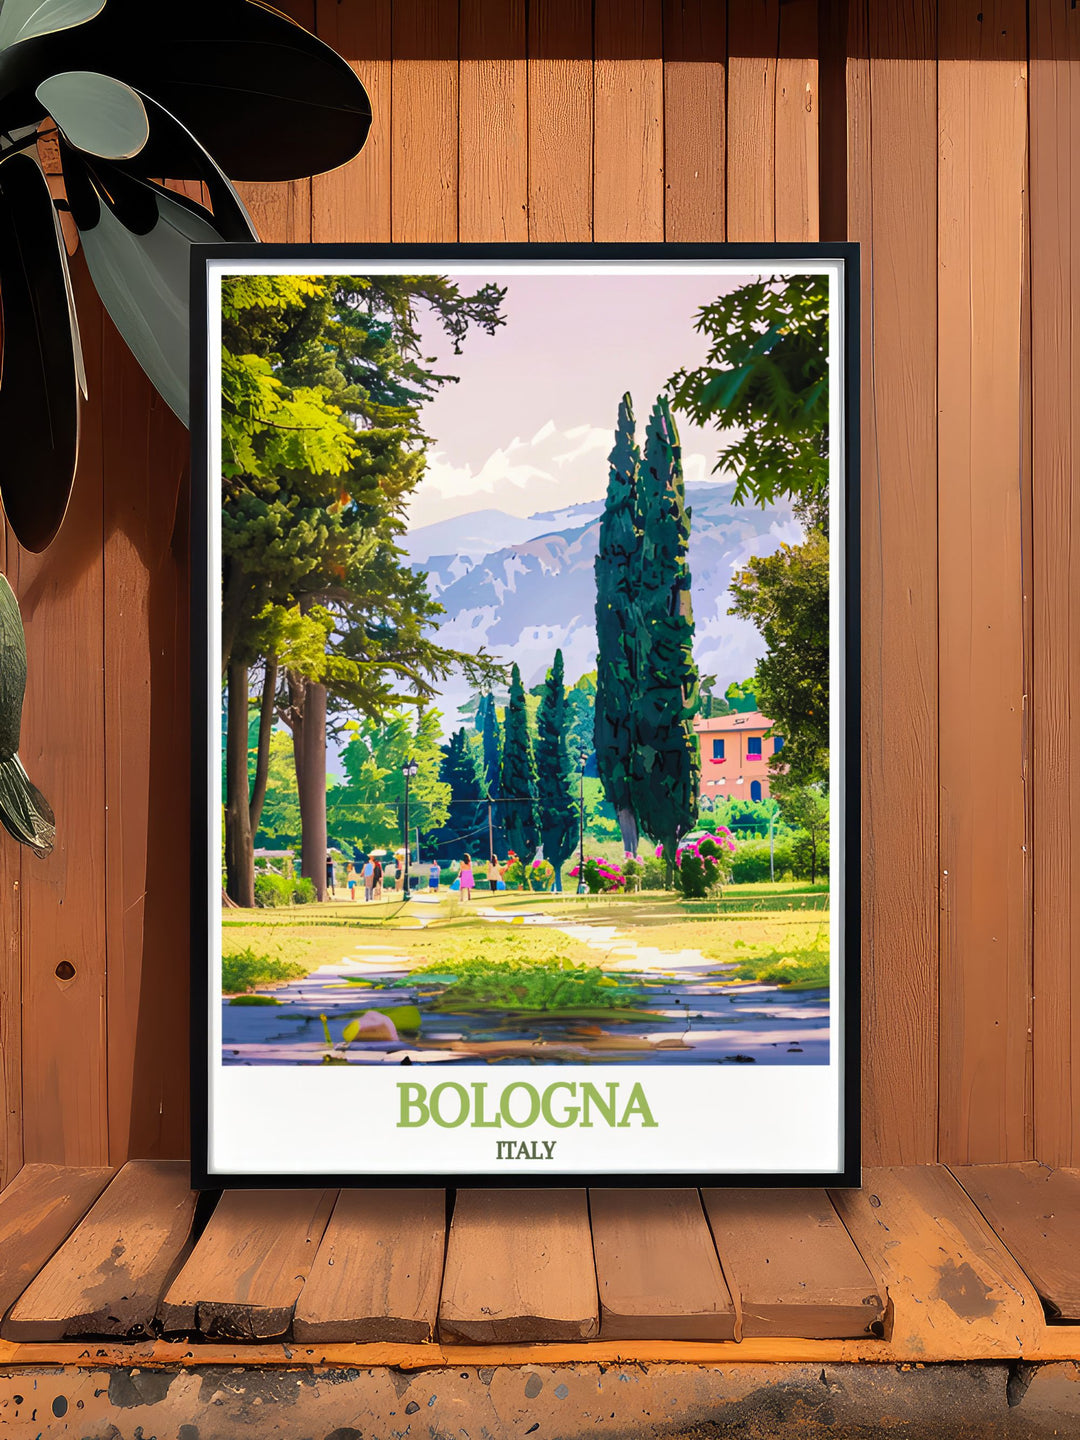 Stunning Bologna art print highlighting the medieval towers and lush greenery of Giardini Margherita, ideal for history buffs and nature enthusiasts.